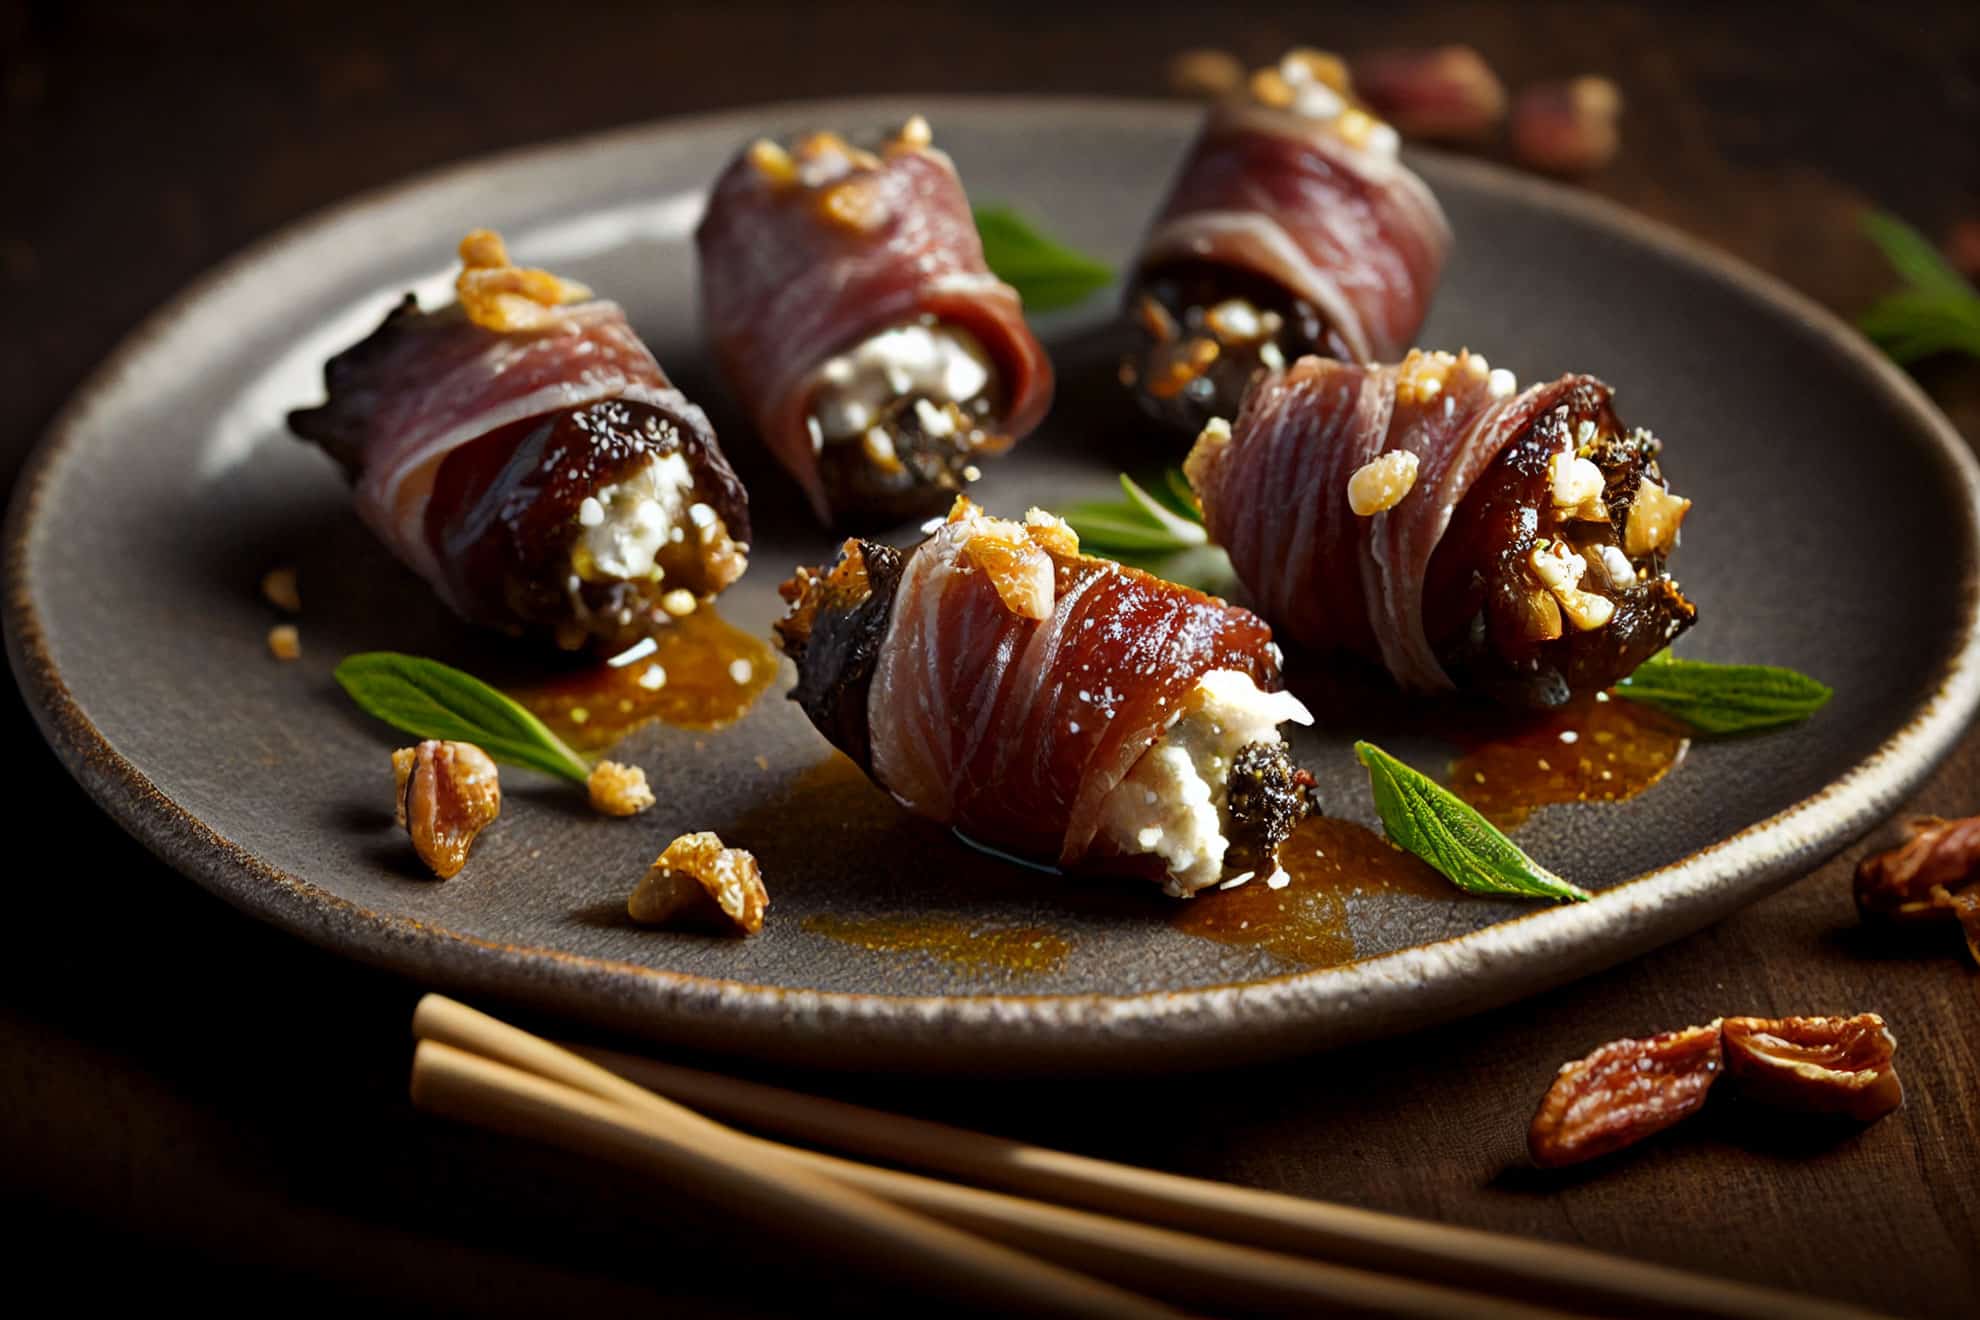 Bacon wrapped Dates stuffed with Goat Cheese